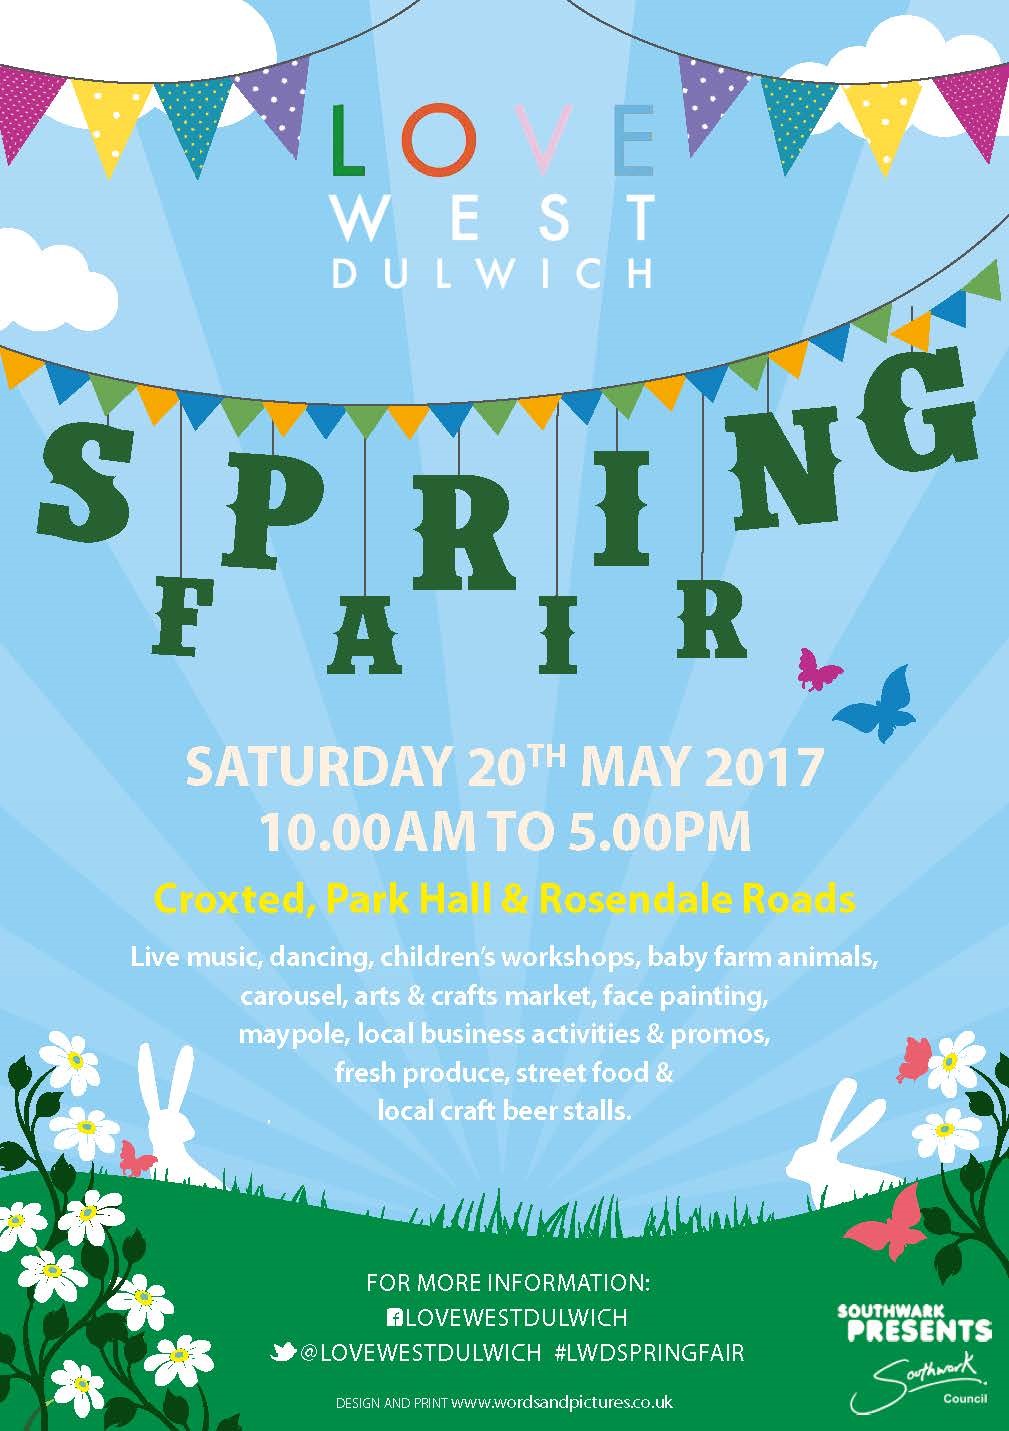 The Love West Dulwich Spring Fair is here again!